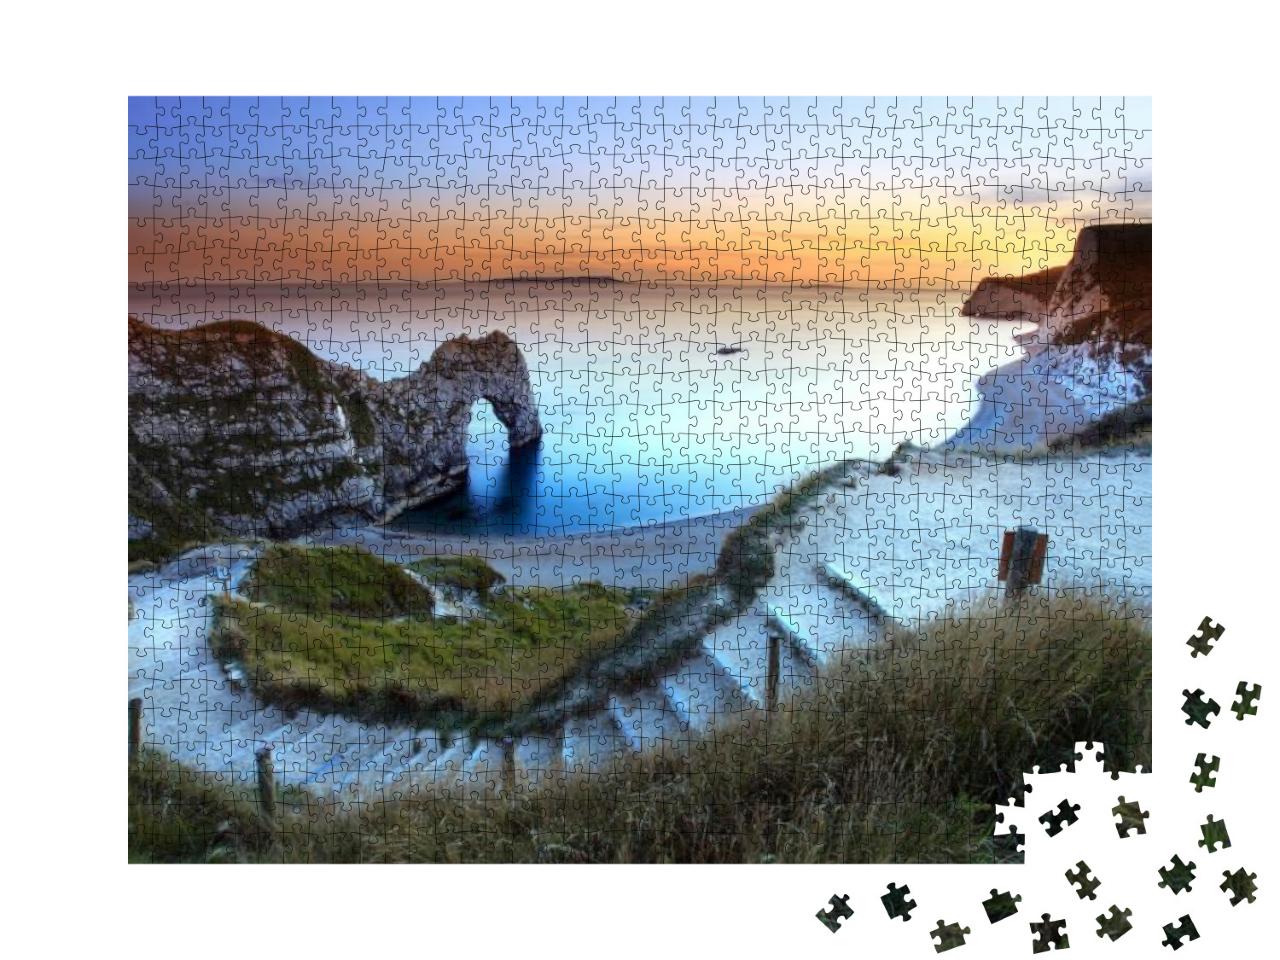 Durdle Door Sunset Dorset England... Jigsaw Puzzle with 1000 pieces